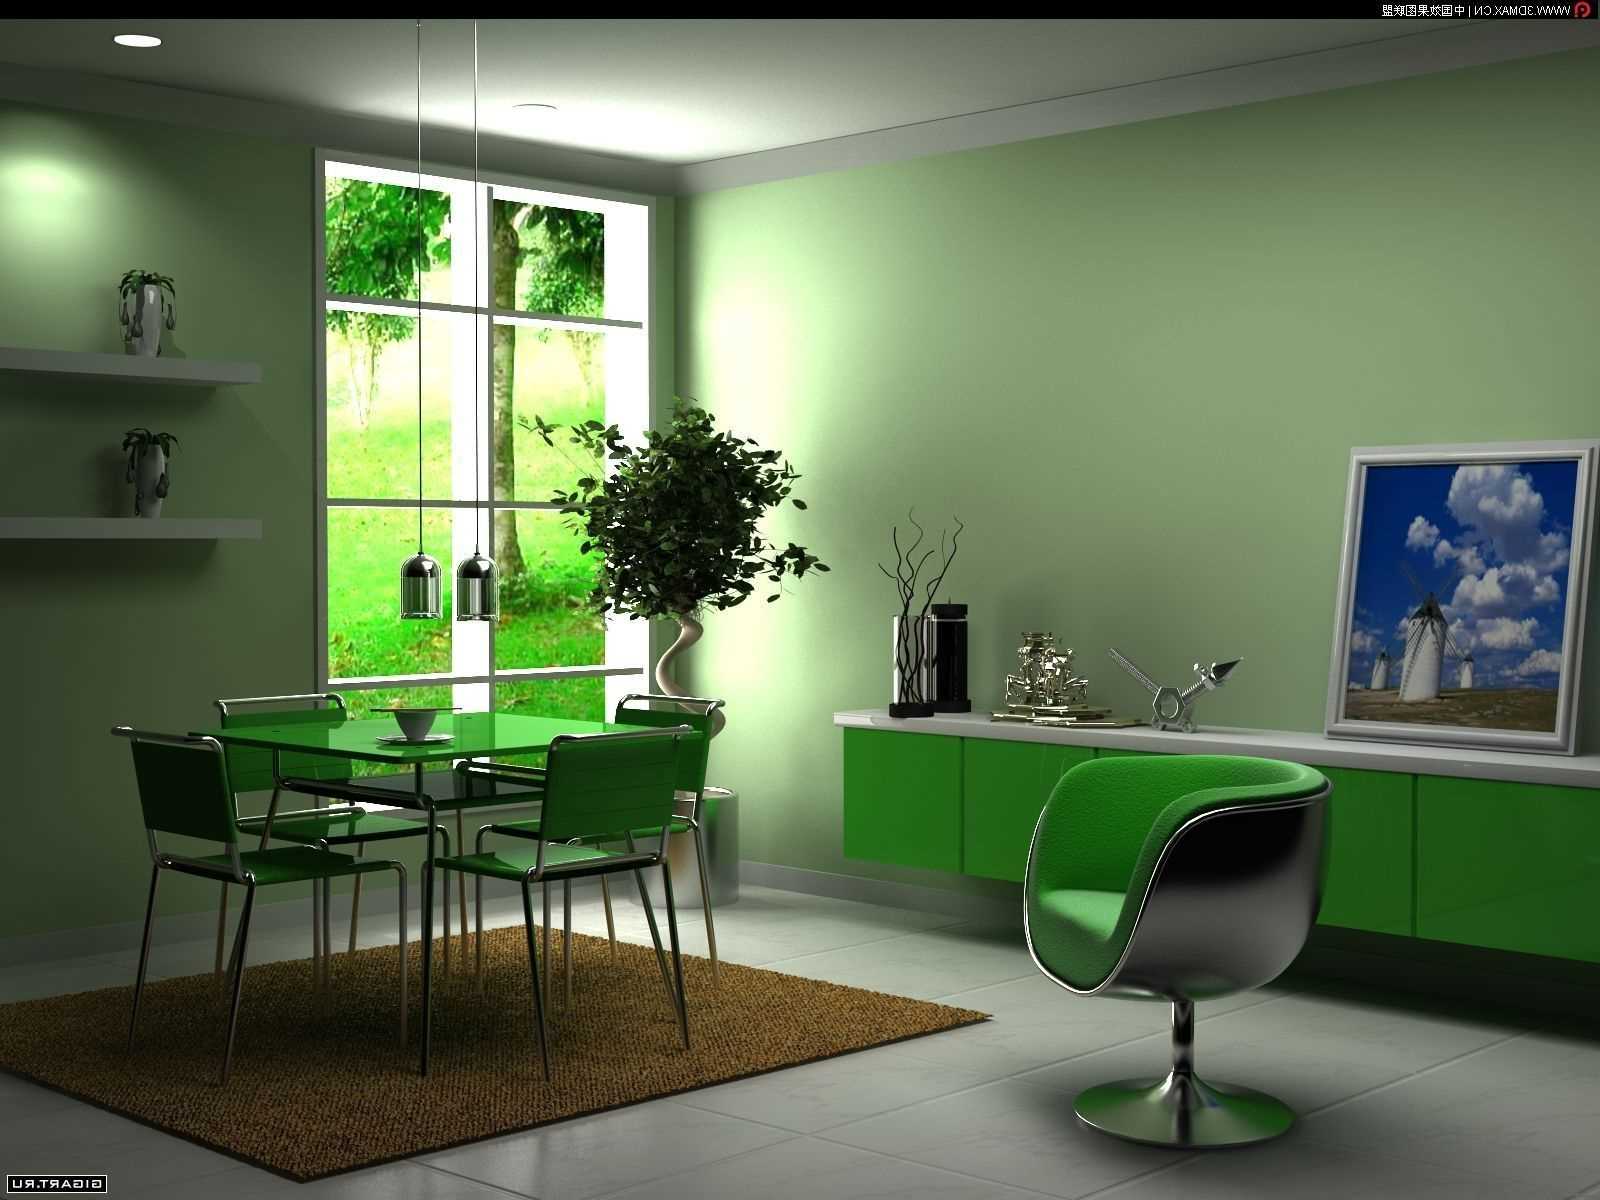 the use of green in an unusual apartment design